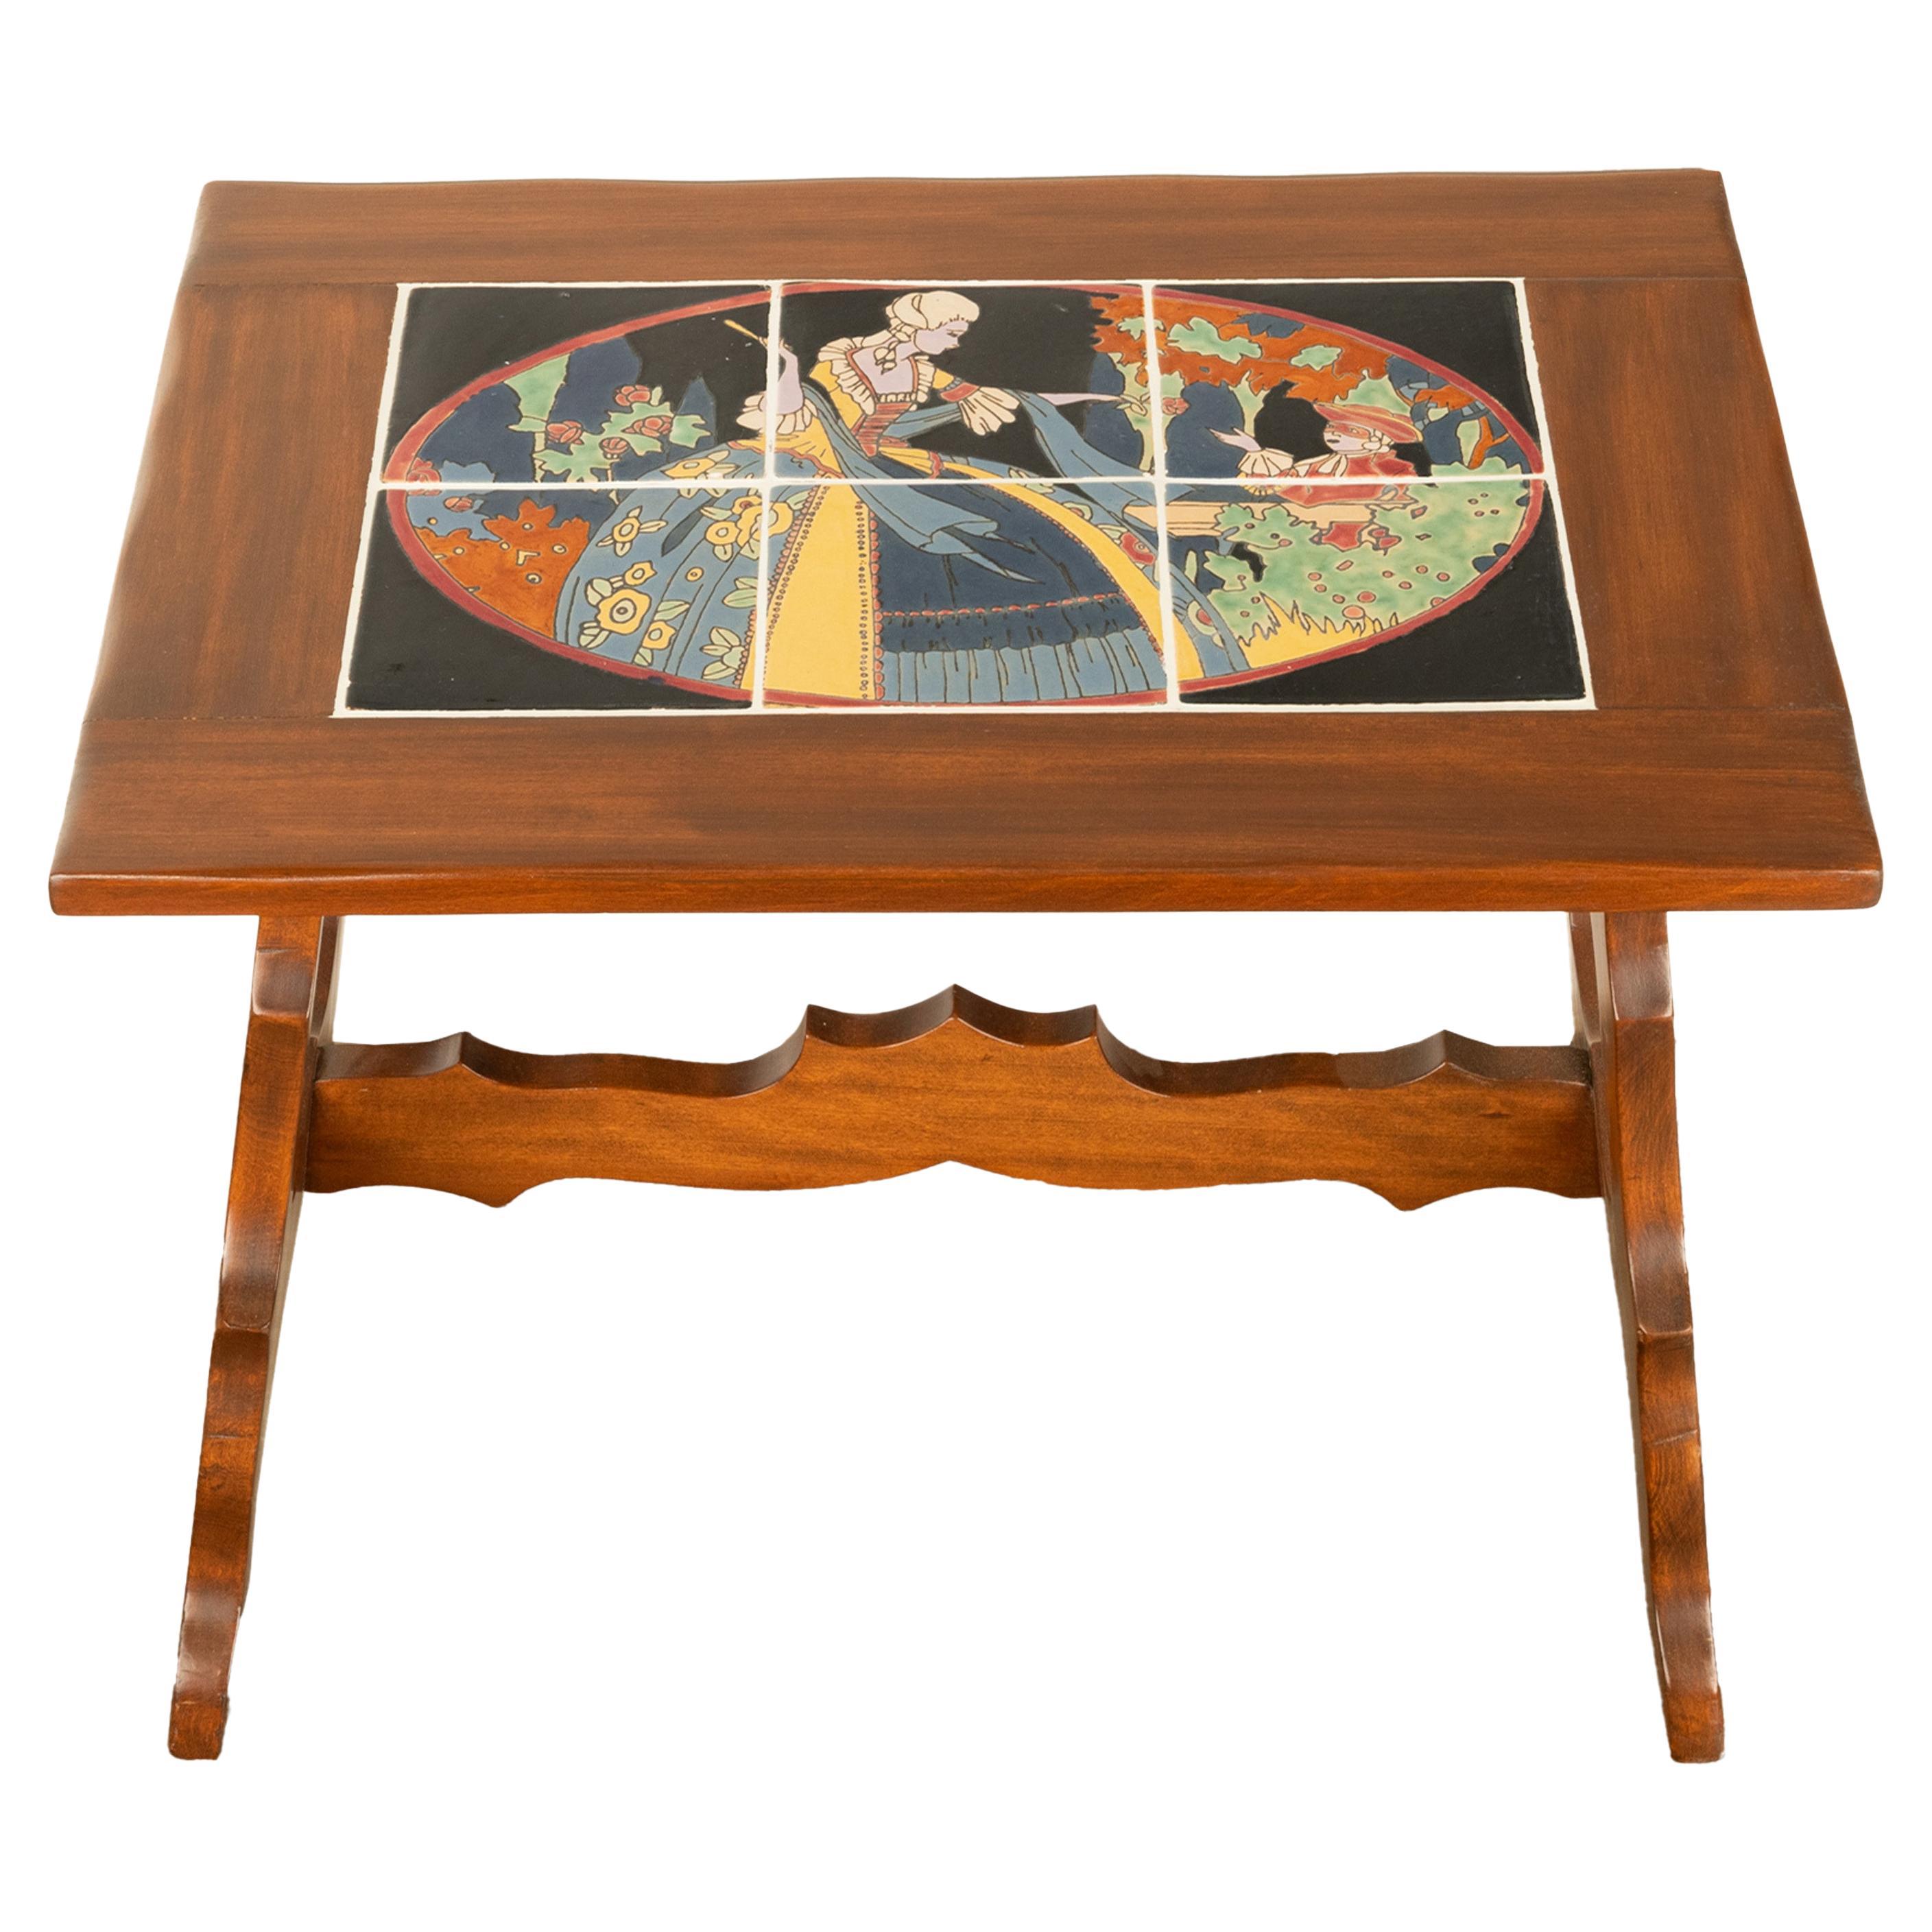 American Antique Mission Catalina Monterrey California Tile Top Walnut Coffee Table 1930 For Sale